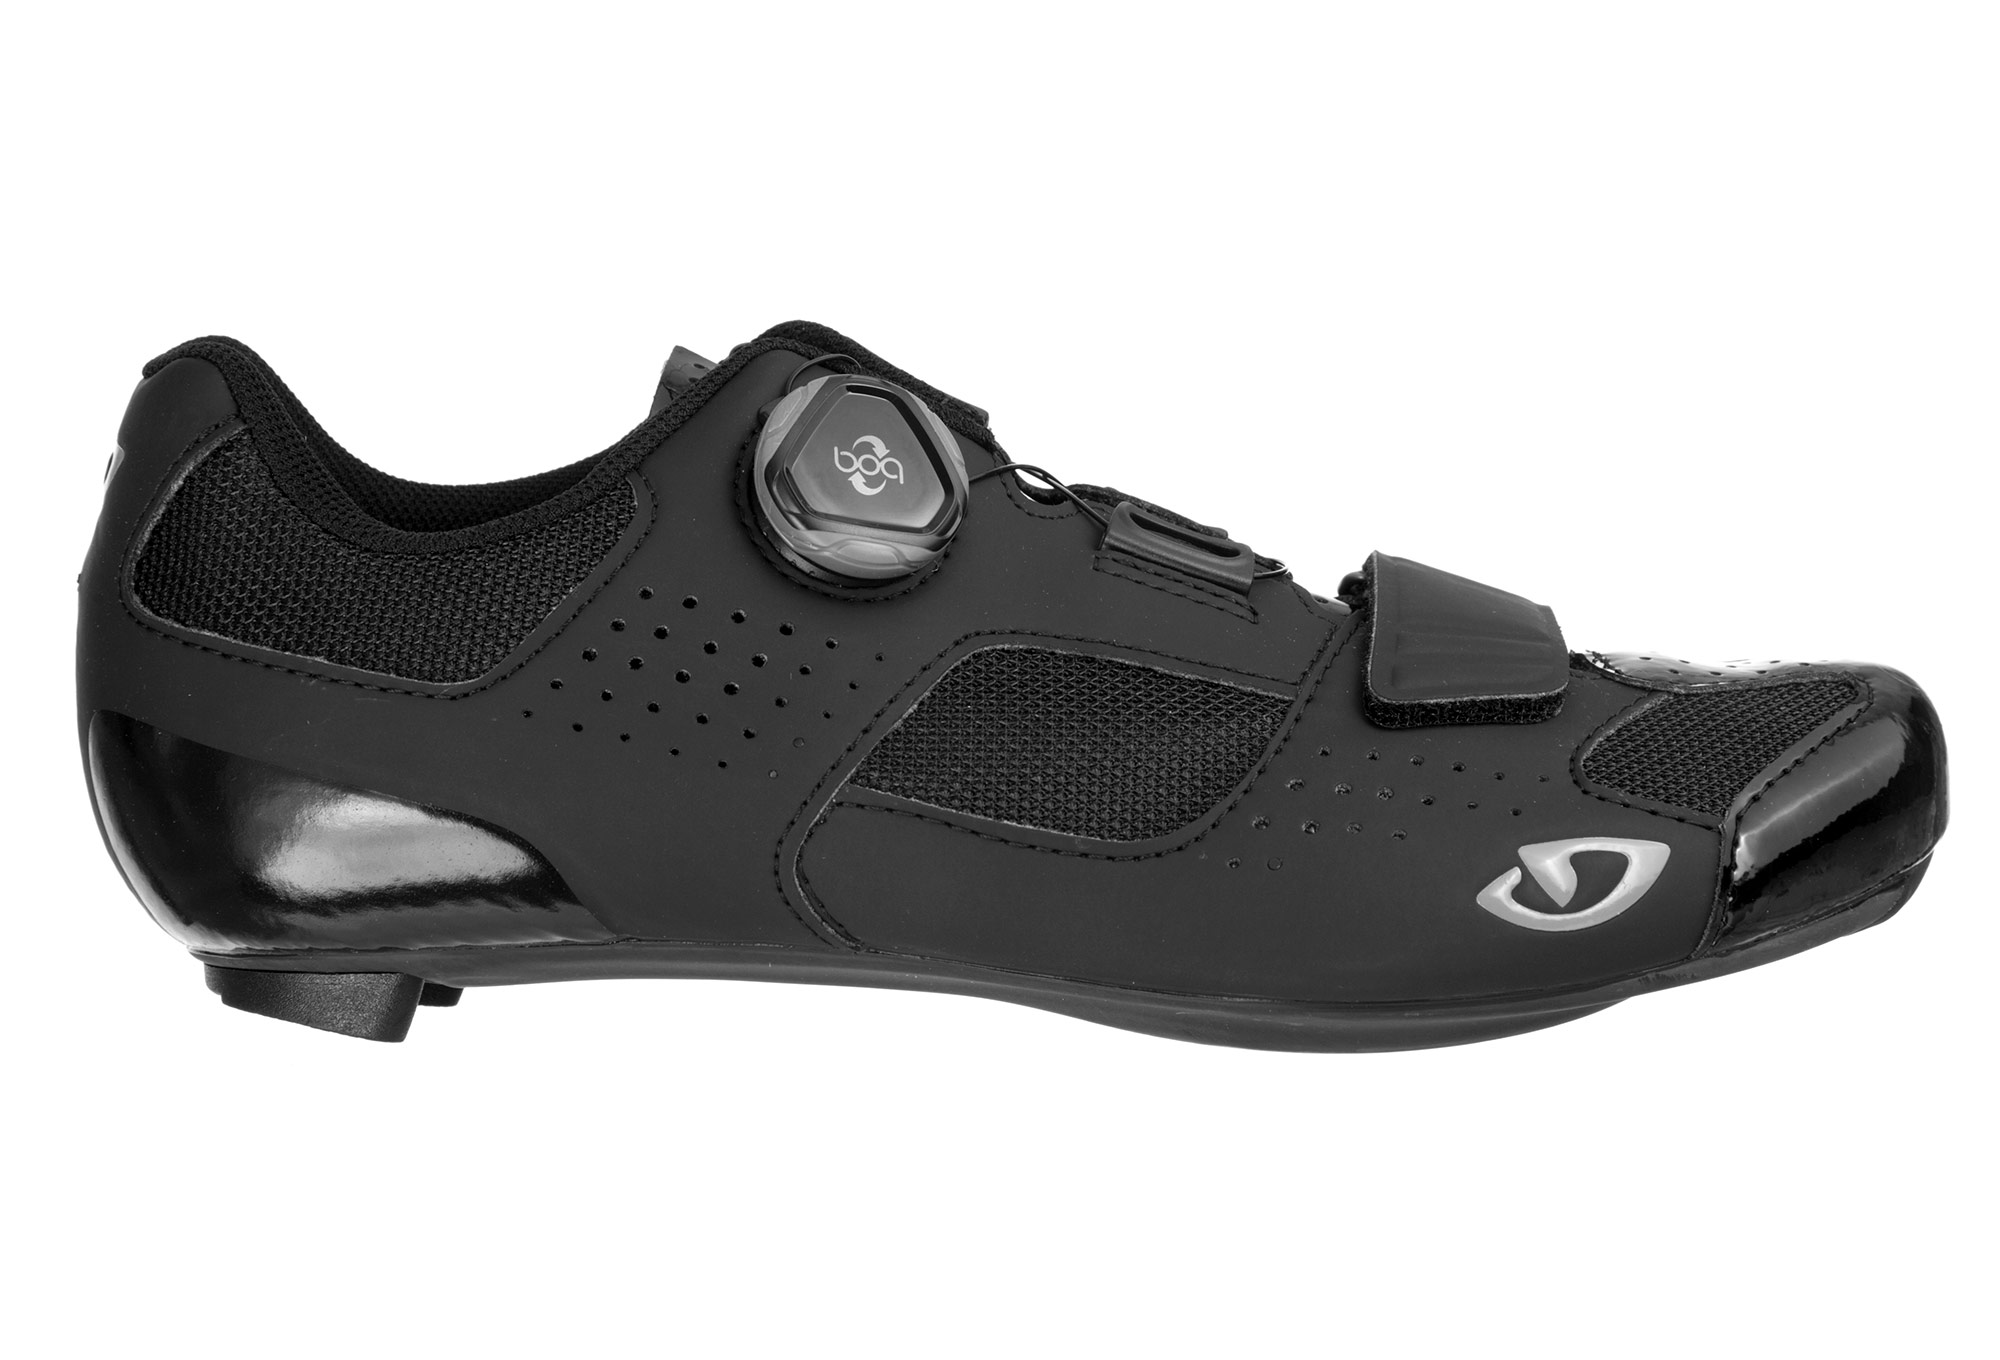 endura road overshoes size guide